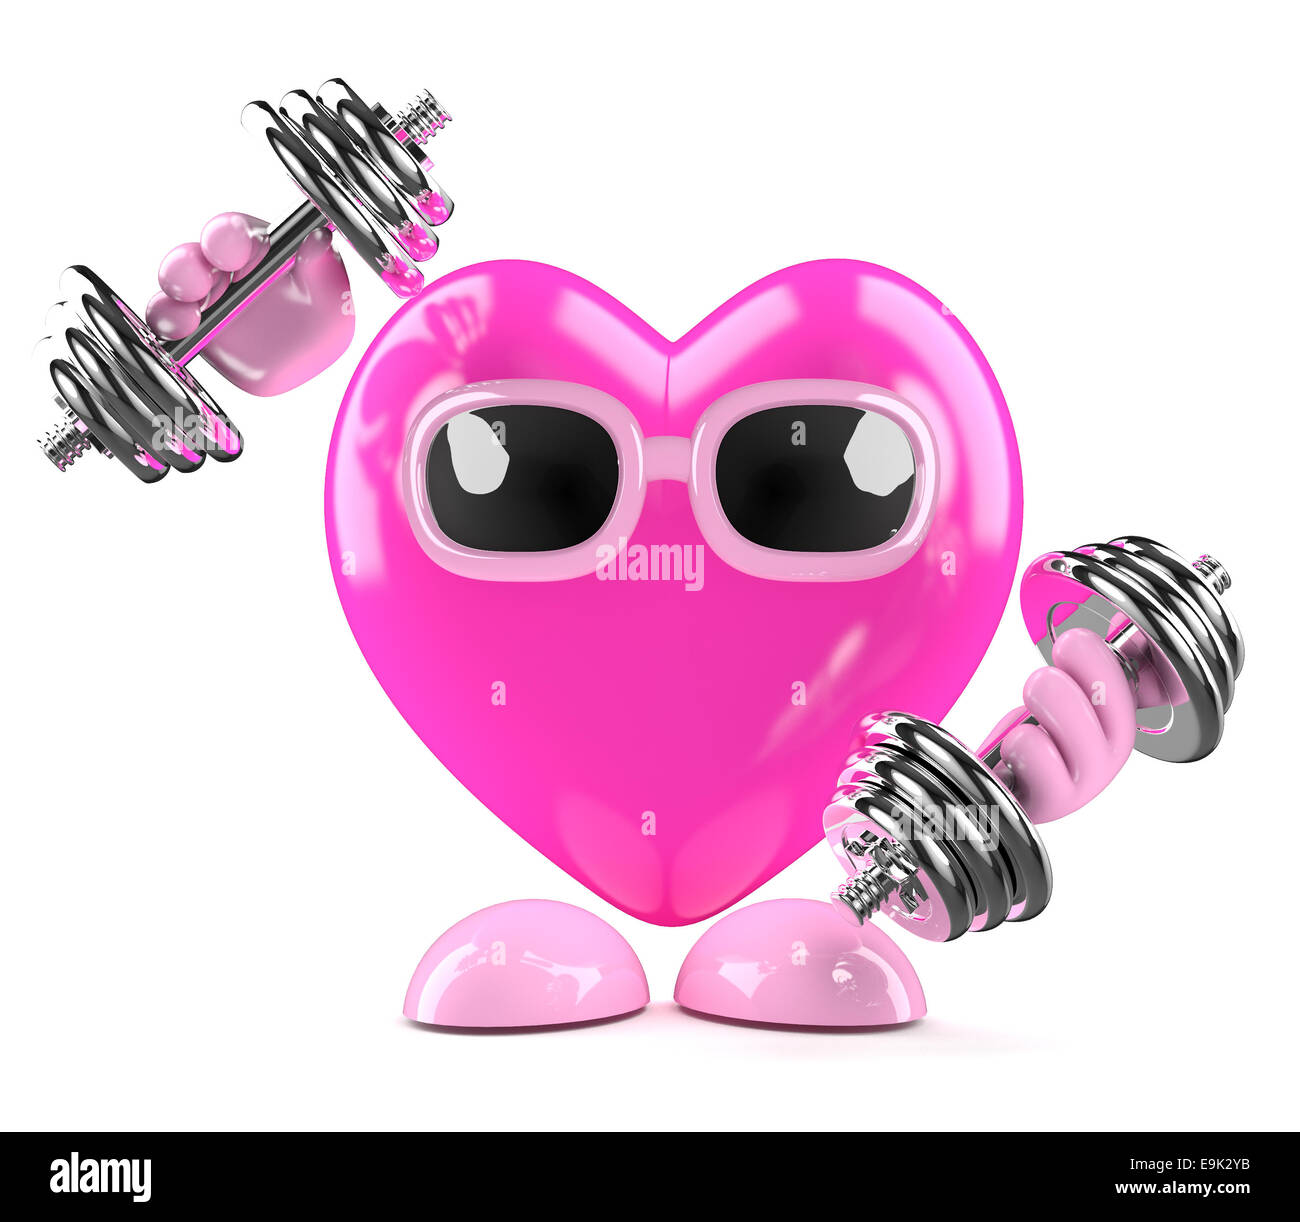 3d render of a heart character working out with weights Stock Photo